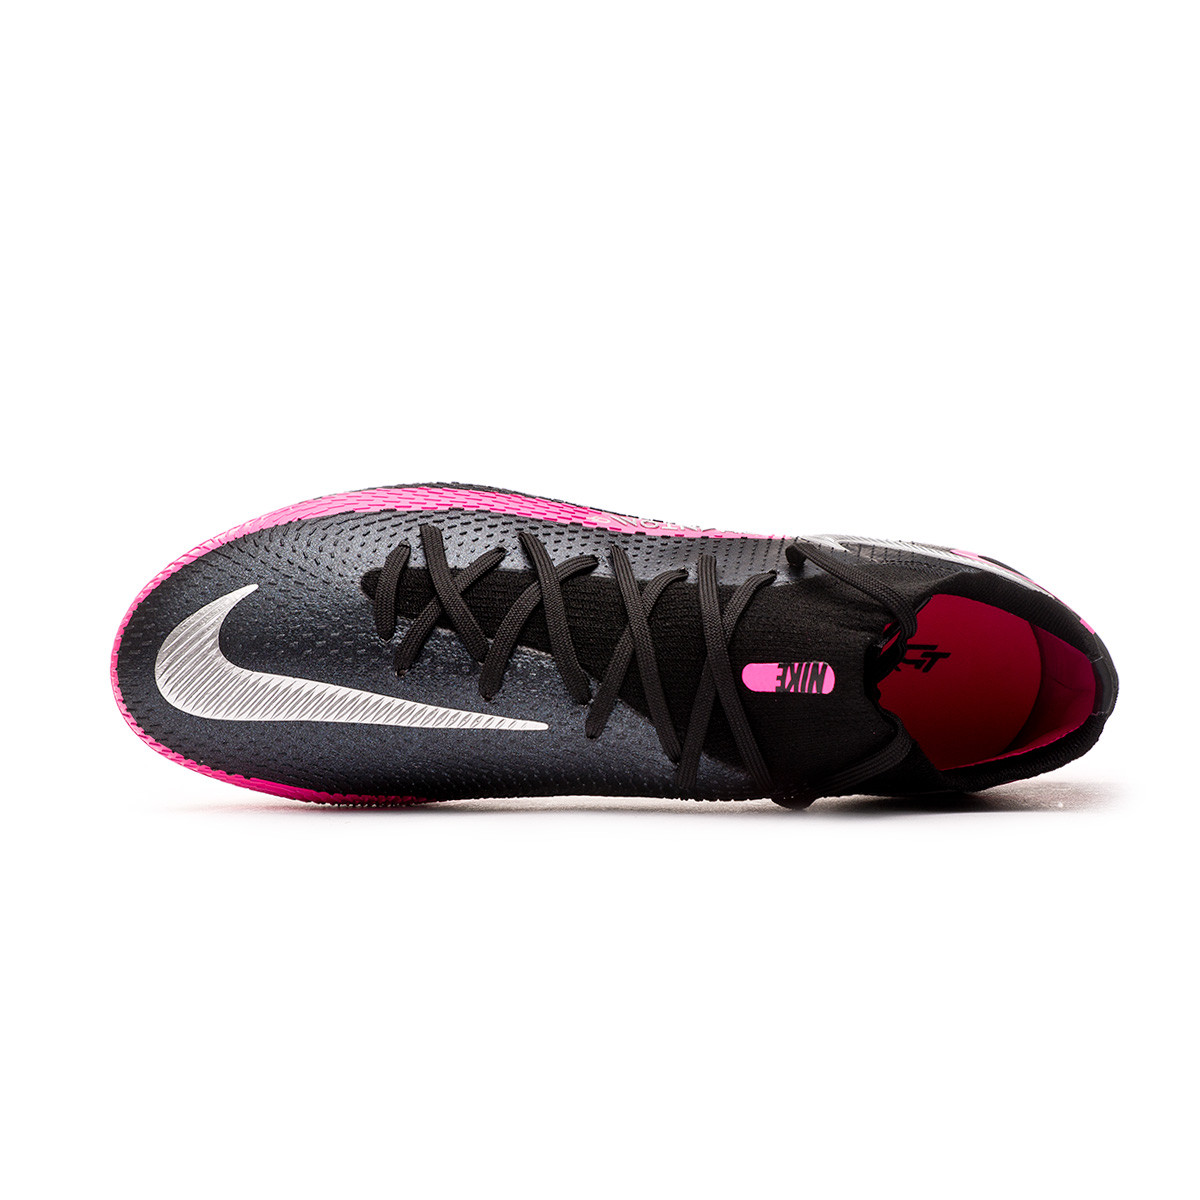 pink and black nike football boots